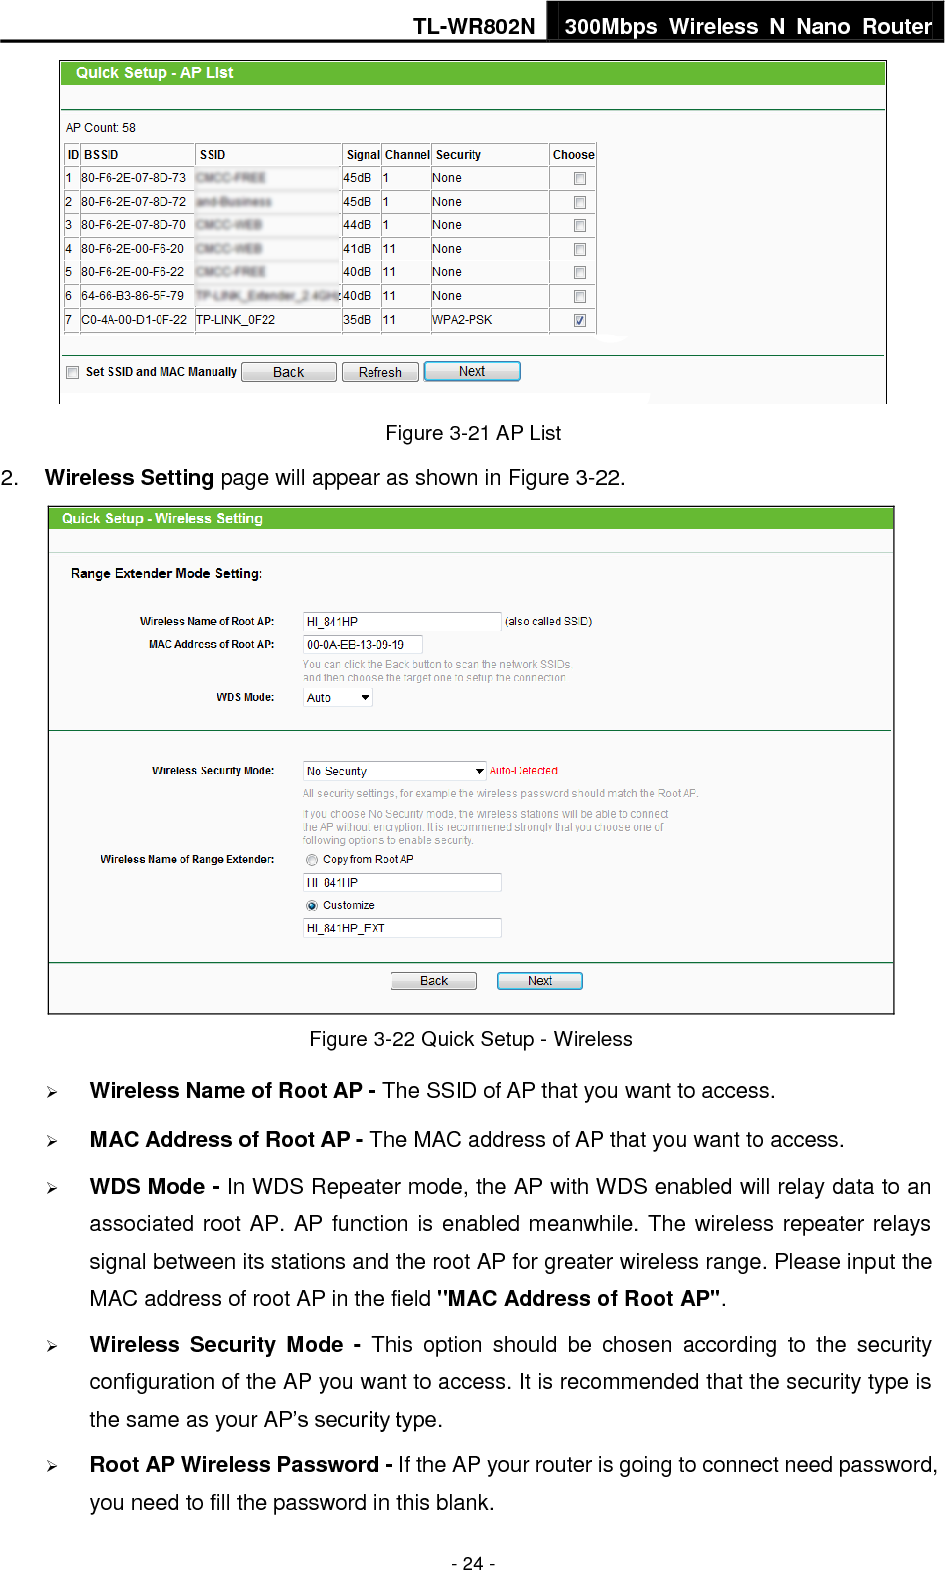 TL-WR802N 300Mbps  Wireless  N  Nano  Router  - 24 -  Figure 3-21 AP List 2. Wireless Setting page will appear as shown in Figure 3-22.    Figure 3-22 Quick Setup - Wireless  Wireless Name of Root AP - The SSID of AP that you want to access.  MAC Address of Root AP - The MAC address of AP that you want to access.  WDS Mode - In WDS Repeater mode, the AP with WDS enabled will relay data to an associated root AP. AP function is enabled meanwhile. The wireless repeater relays signal between its stations and the root AP for greater wireless range. Please input the MAC address of root AP in the field &quot;MAC Address of Root AP&quot;.  Wireless  Security  Mode  -  This  option  should  be  chosen  according  to  the  security configuration of the AP you want to access. It is recommended that the security type is the same as your AP’s security type.  Root AP Wireless Password - If the AP your router is going to connect need password, you need to fill the password in this blank. 